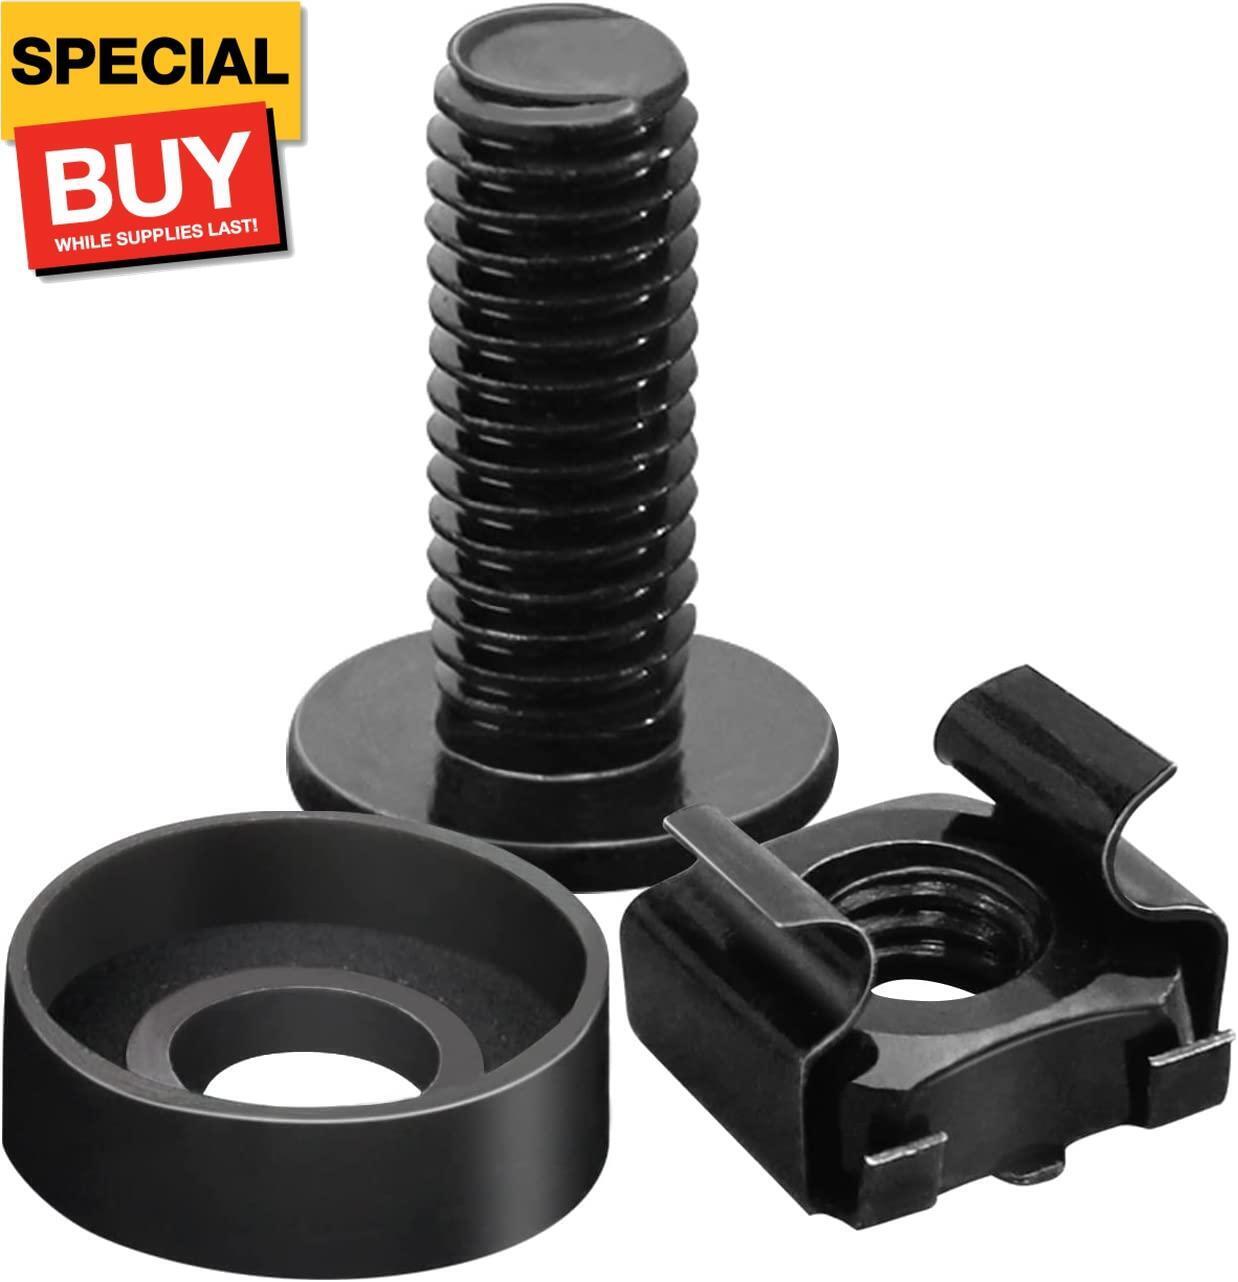 50-pack M6 X 16mm Computer Rack Mount Cage Screws and Nuts & Washers for Rack Mo